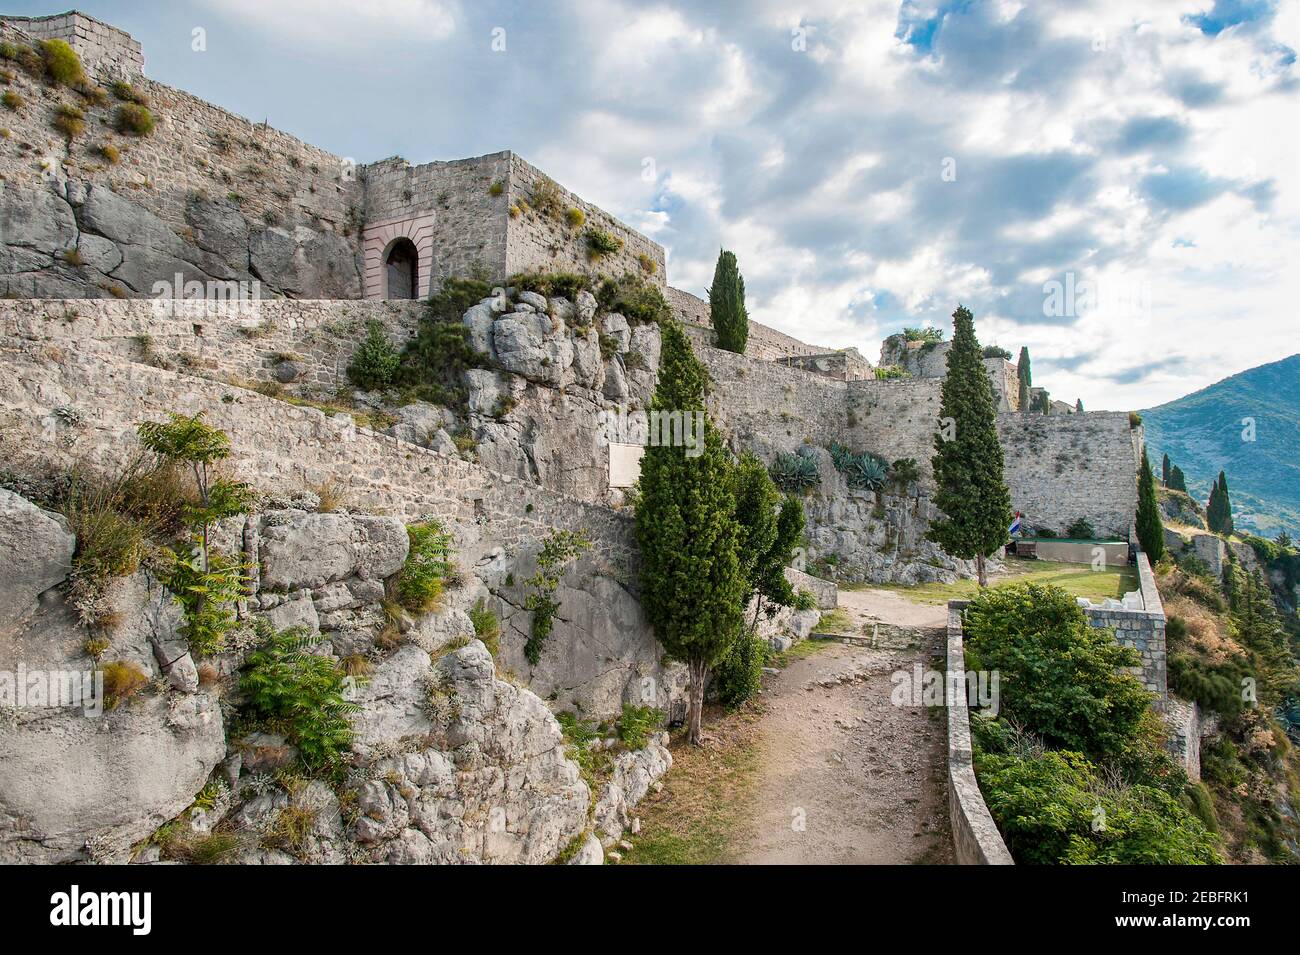 Split, Croatia, August 26, 2019:  Old fortress in Klis, Croatia as a film location for the TV series 'Game of Thrones' Stock Photo